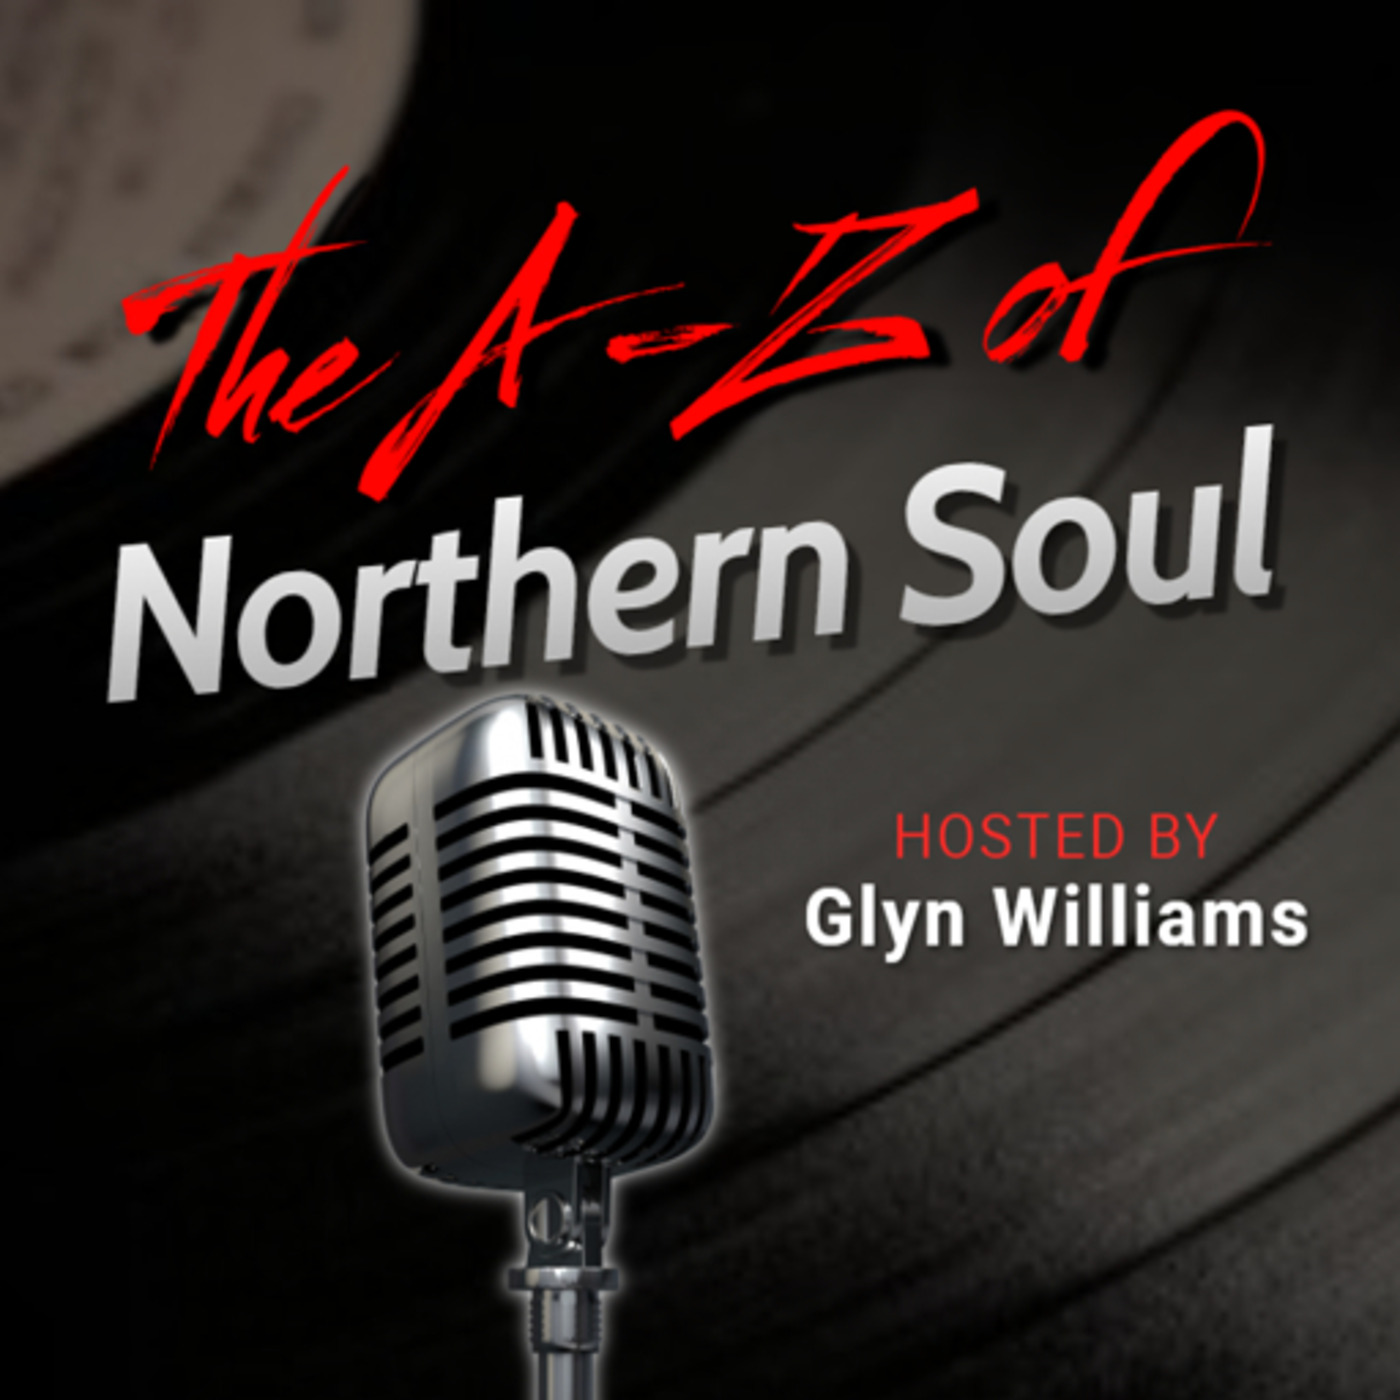 The A-Z of Northern Soul E004